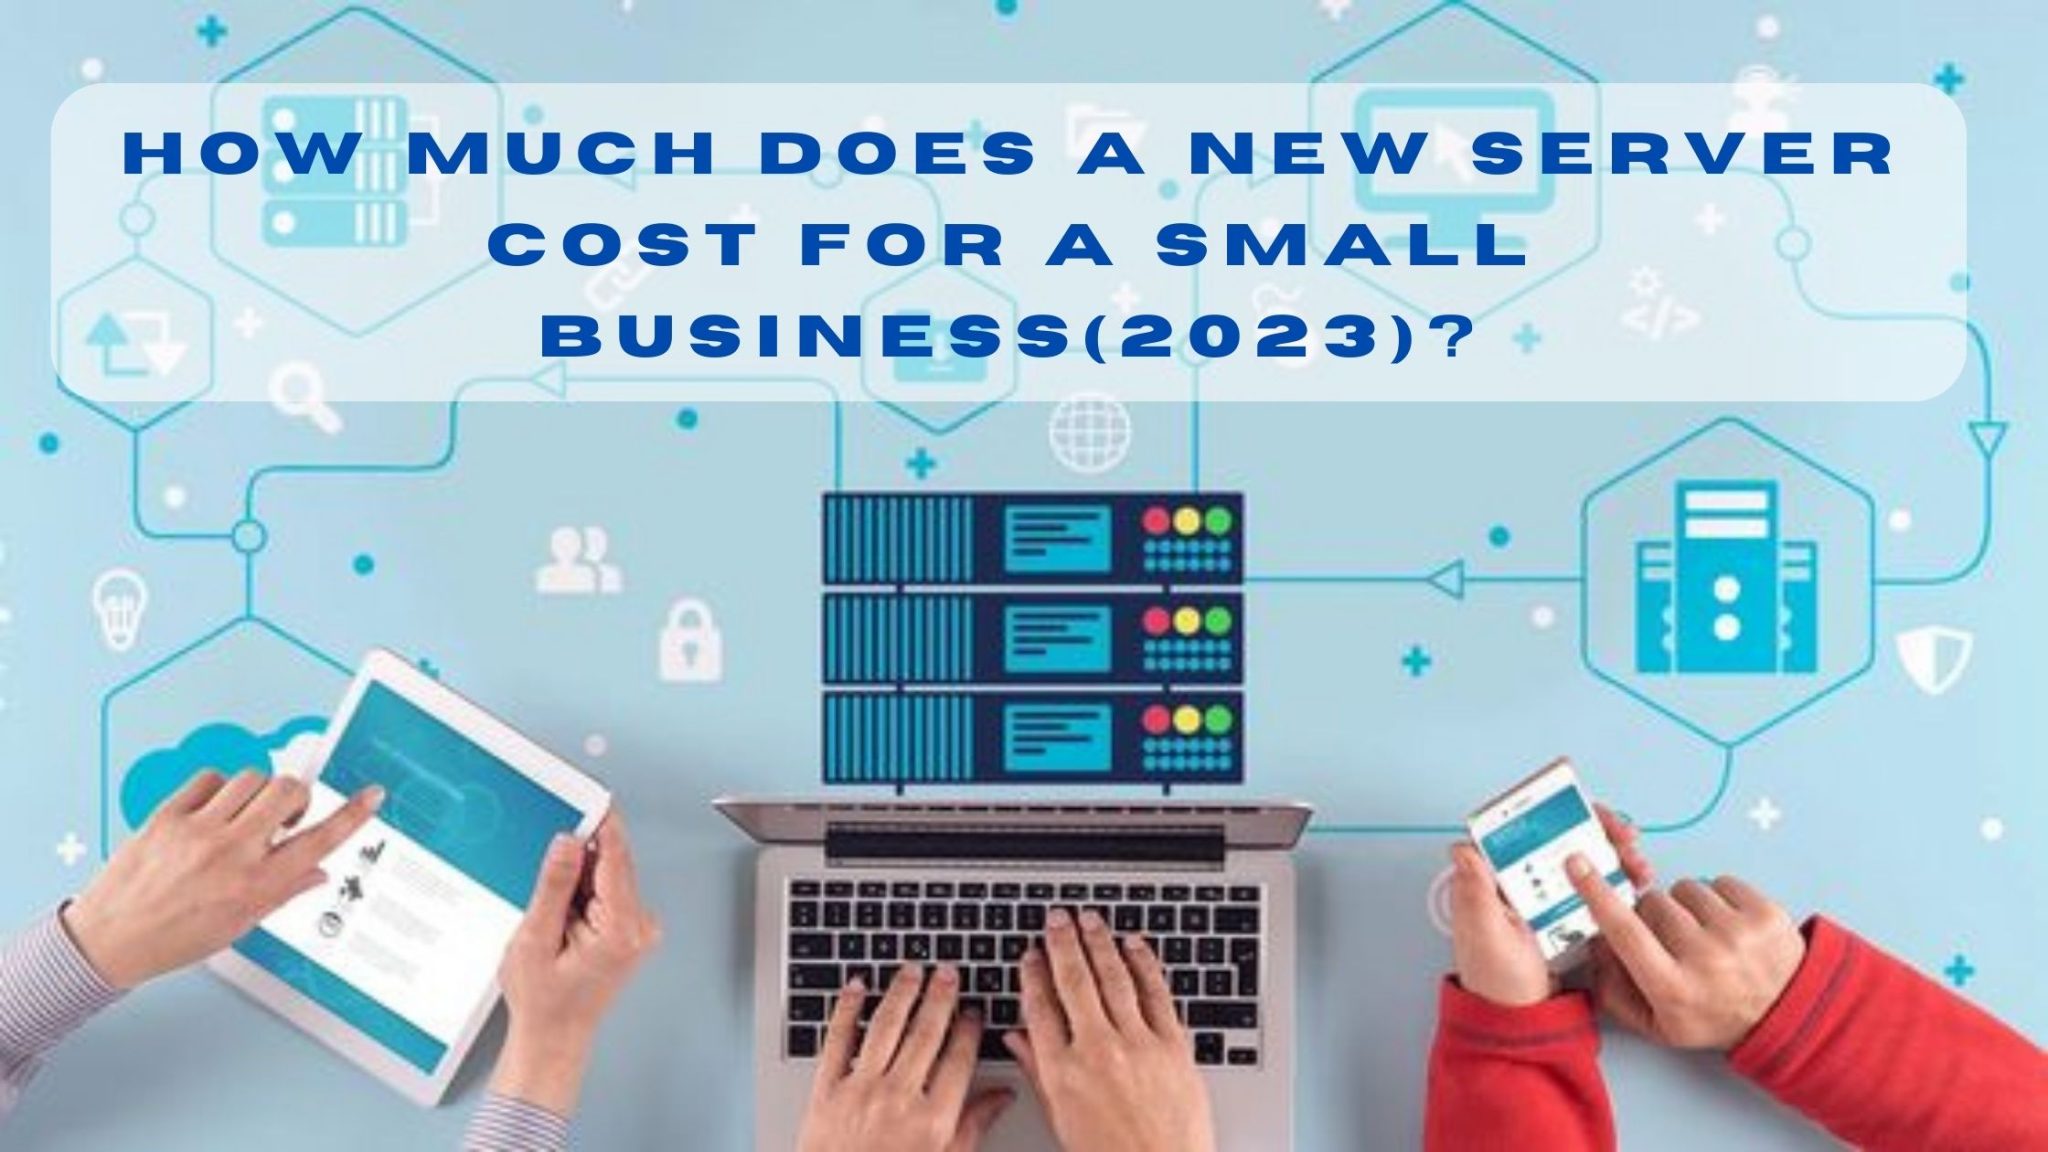 How Much Does a New Server Cost for a Small Business(2023)?